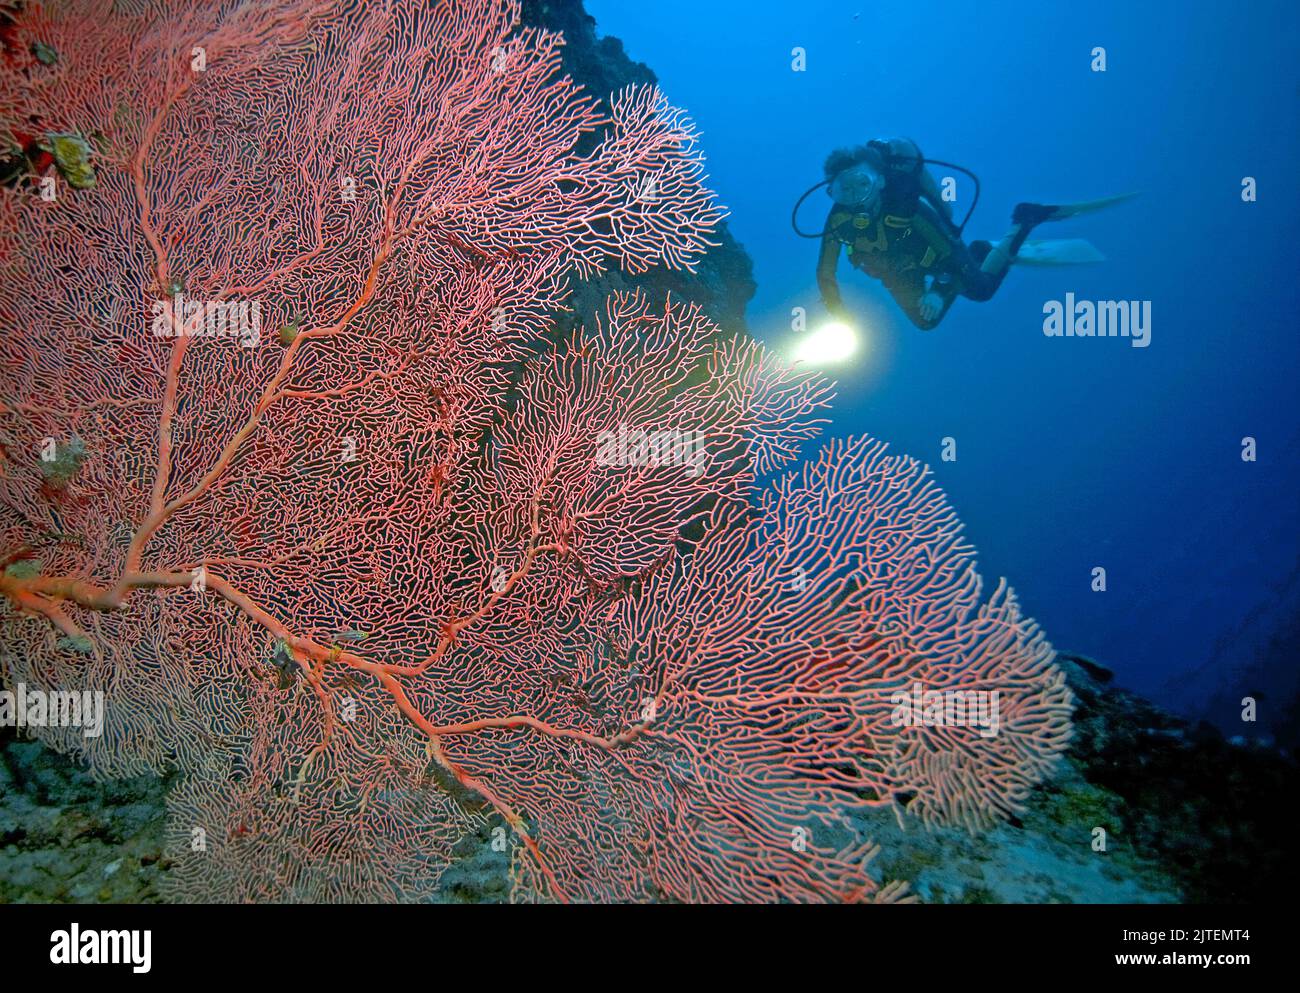 Scuba diver at a coral reef with Giant Sea fans (Annella mollis), Raa Atoll, Maldives, Indian Ocean, Asia Stock Photo